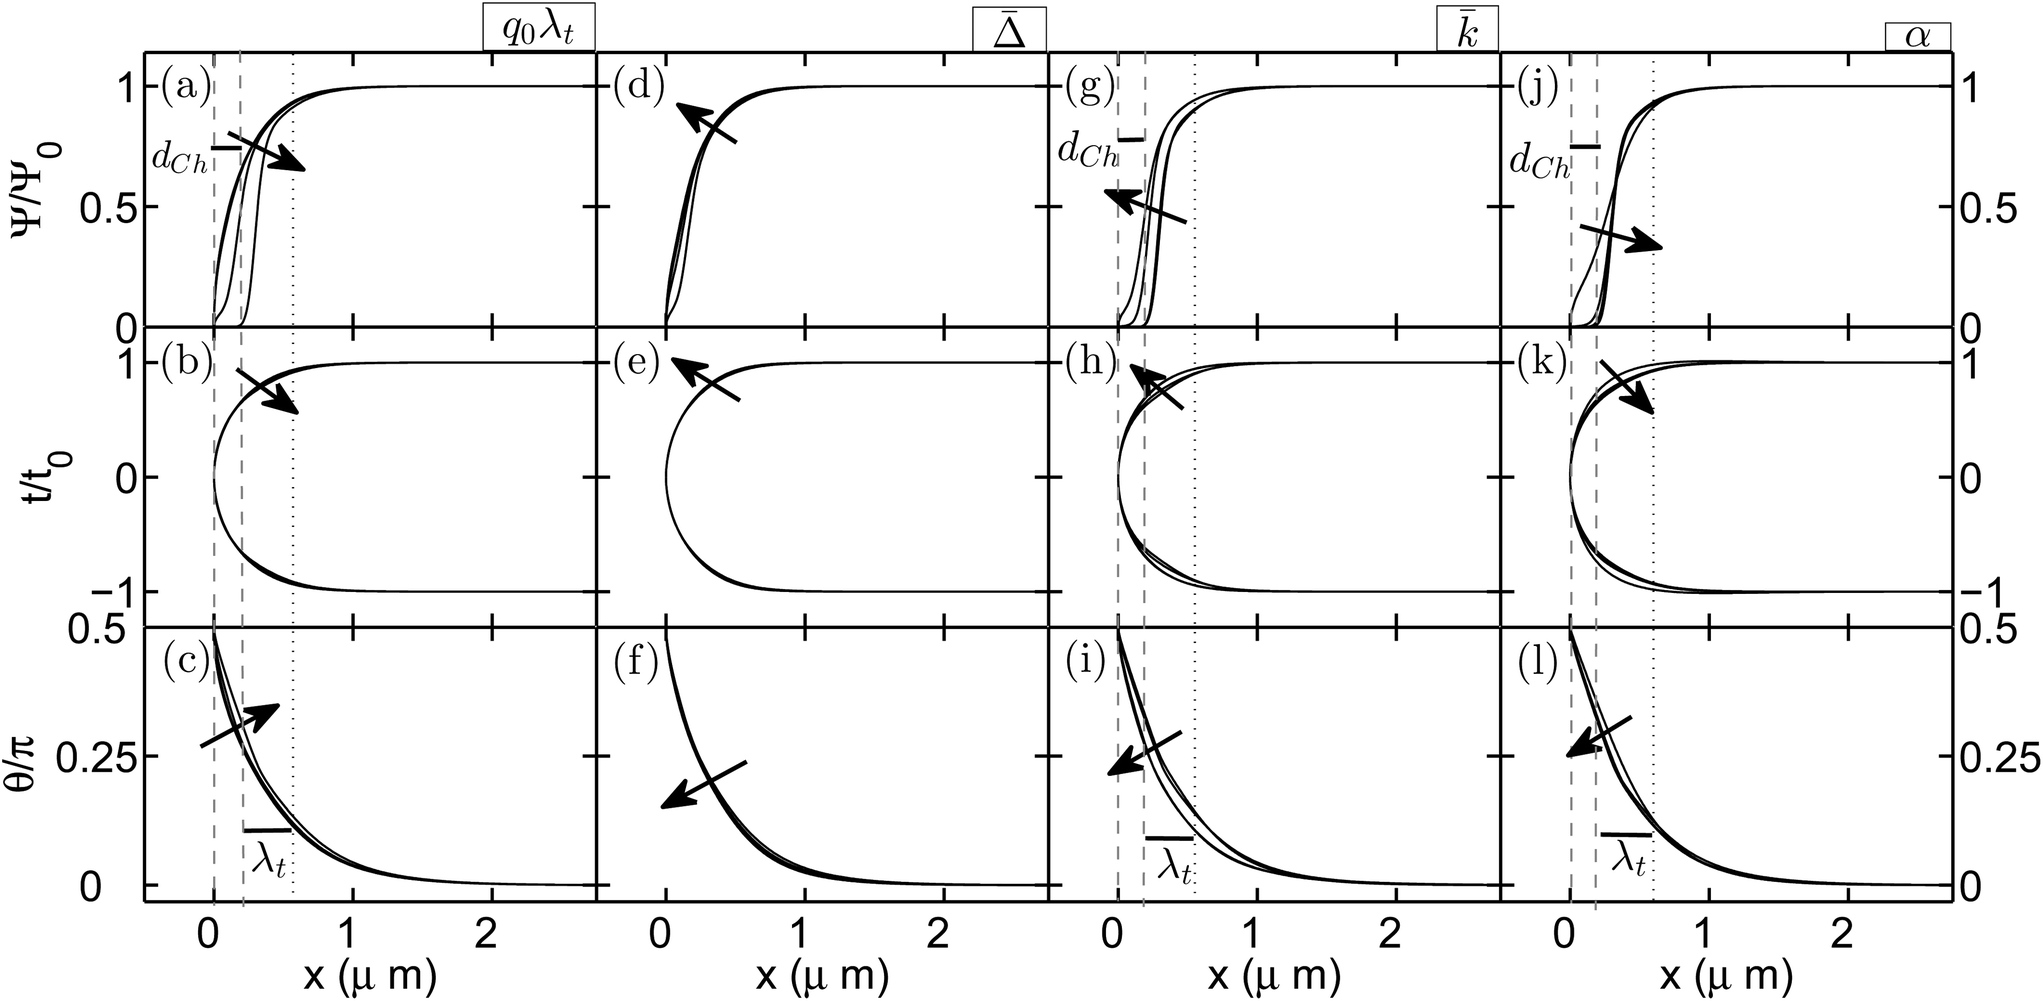 Colloidal membranes of hard rods: unified theory of free edge structure and  twist walls - Soft Matter (RSC Publishing)